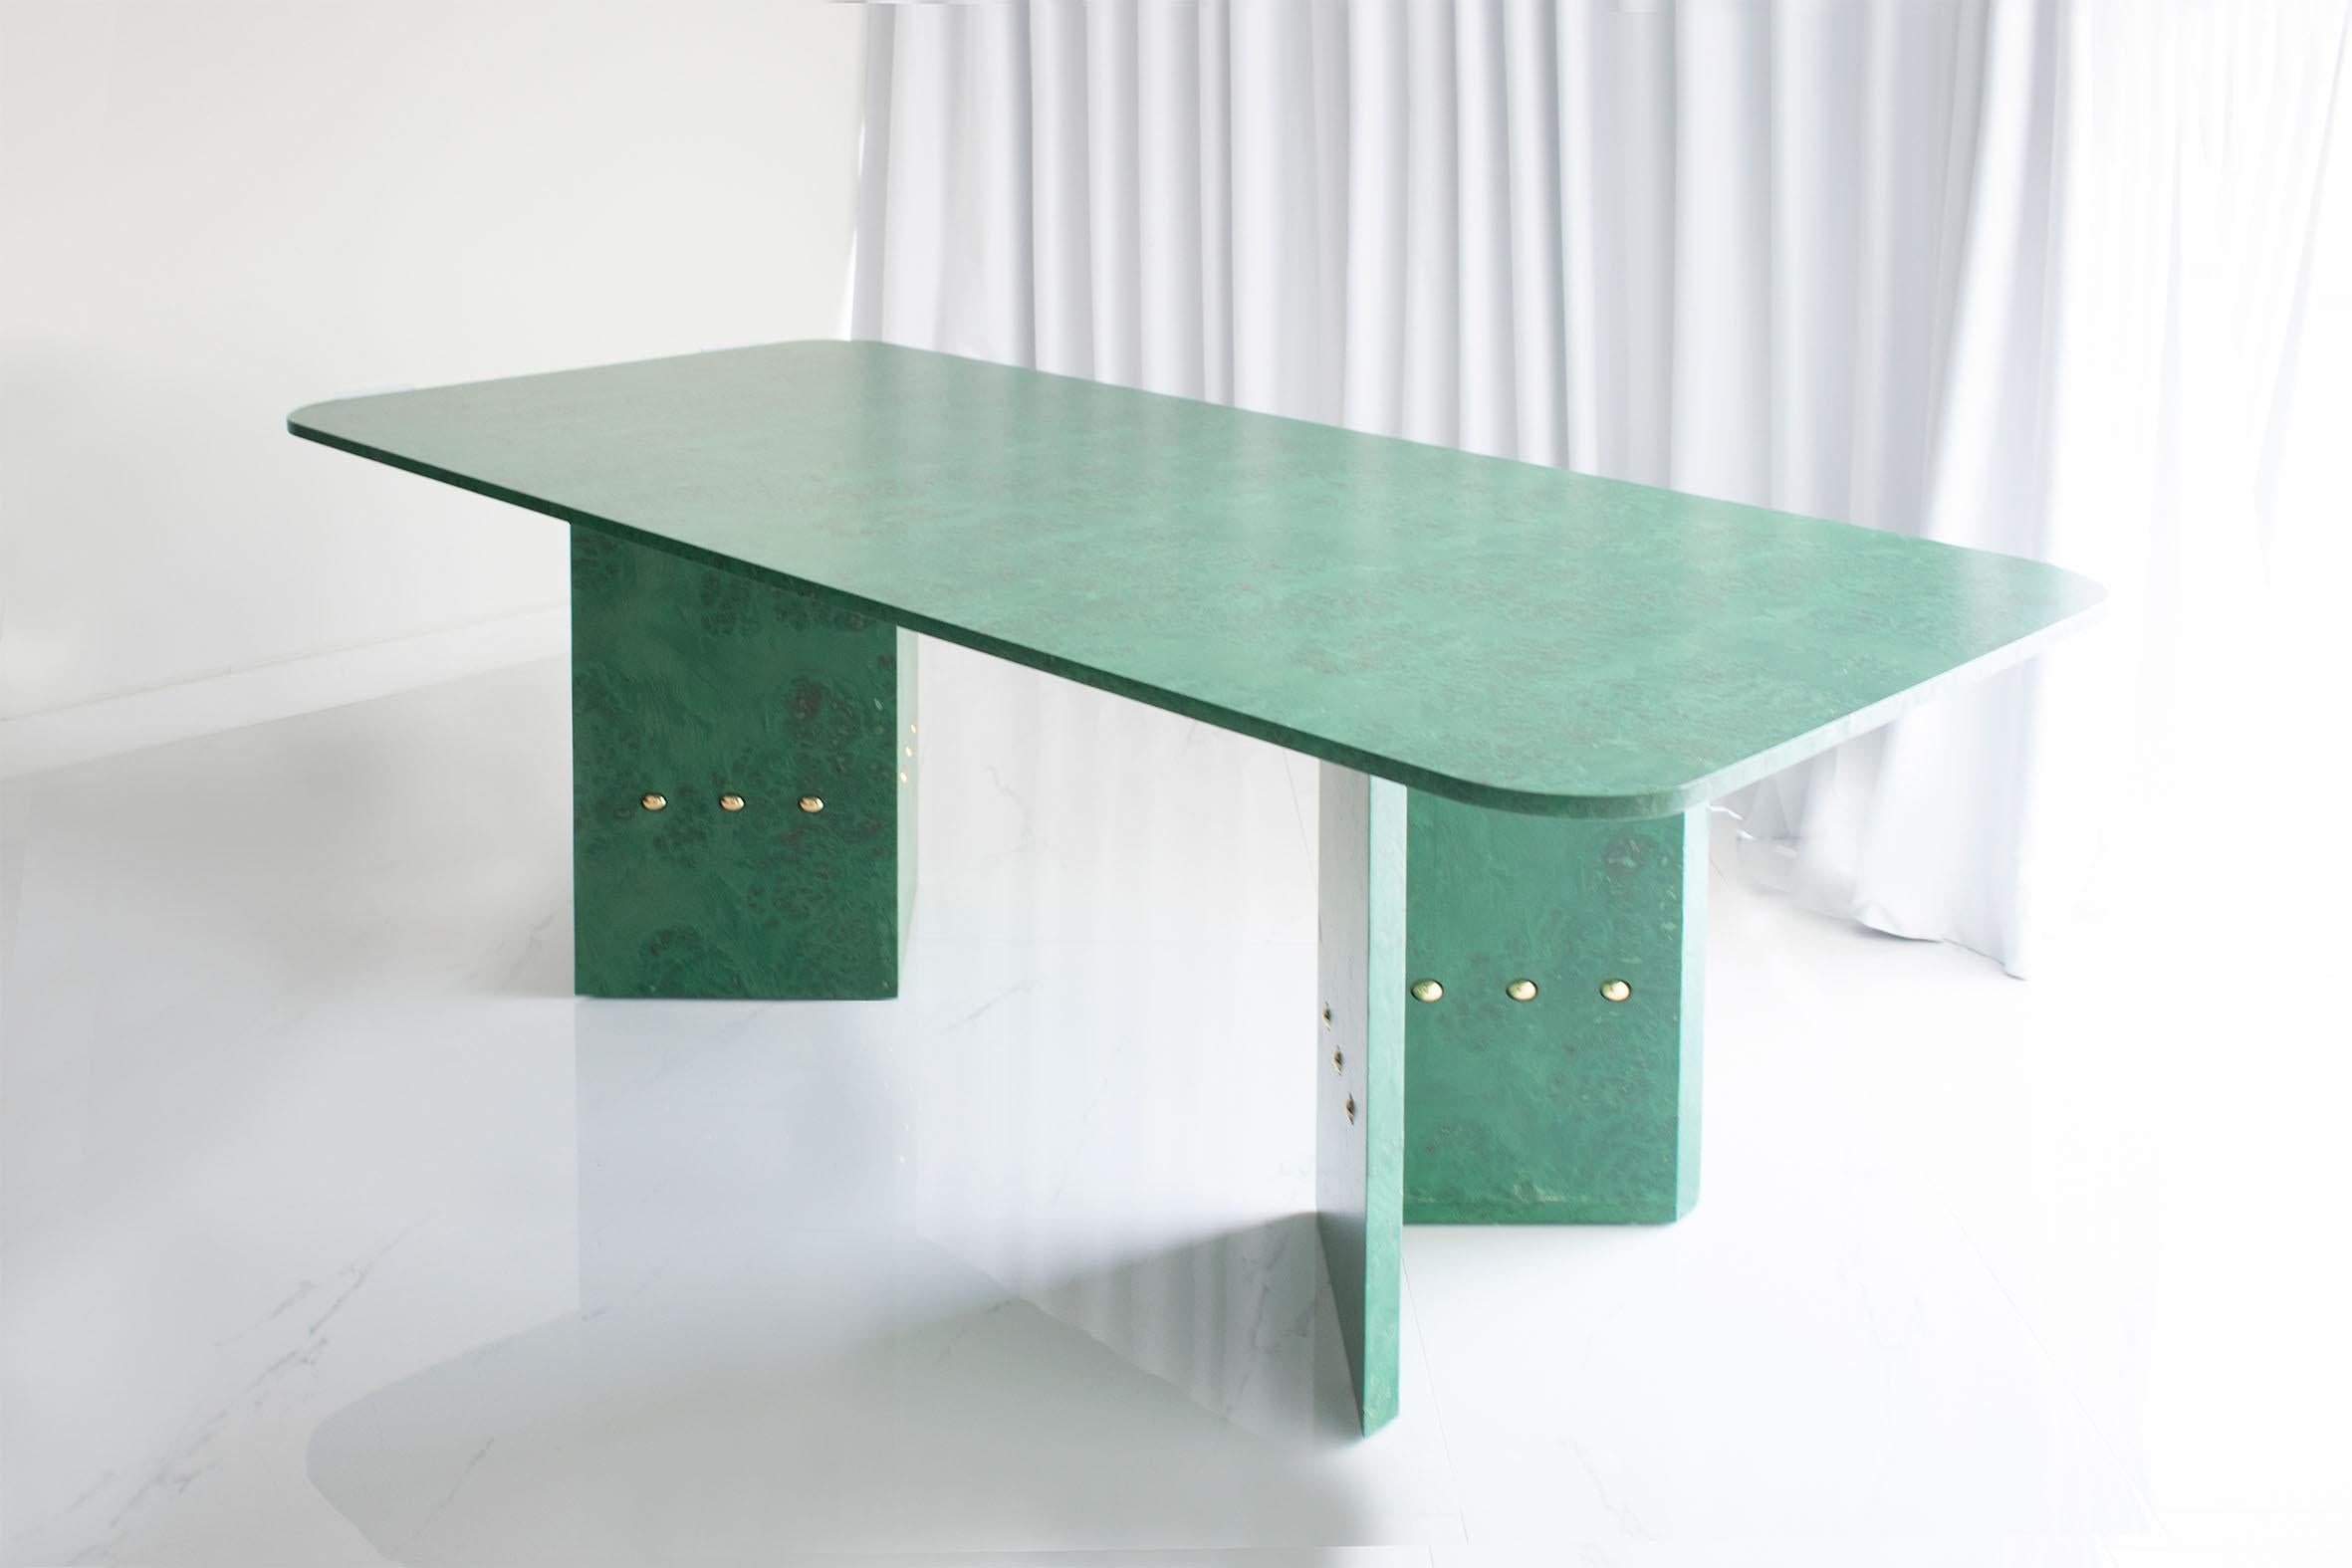 Green high table by Studio Christinekalia
Dimensions: W 110 x D 210 x H 75 cm.
Materials: Wood, mappa burl veneer, solid brass. 

This dining piece is a bold chromatic statement conceived with fine detailing. Its timeless design brings a piece